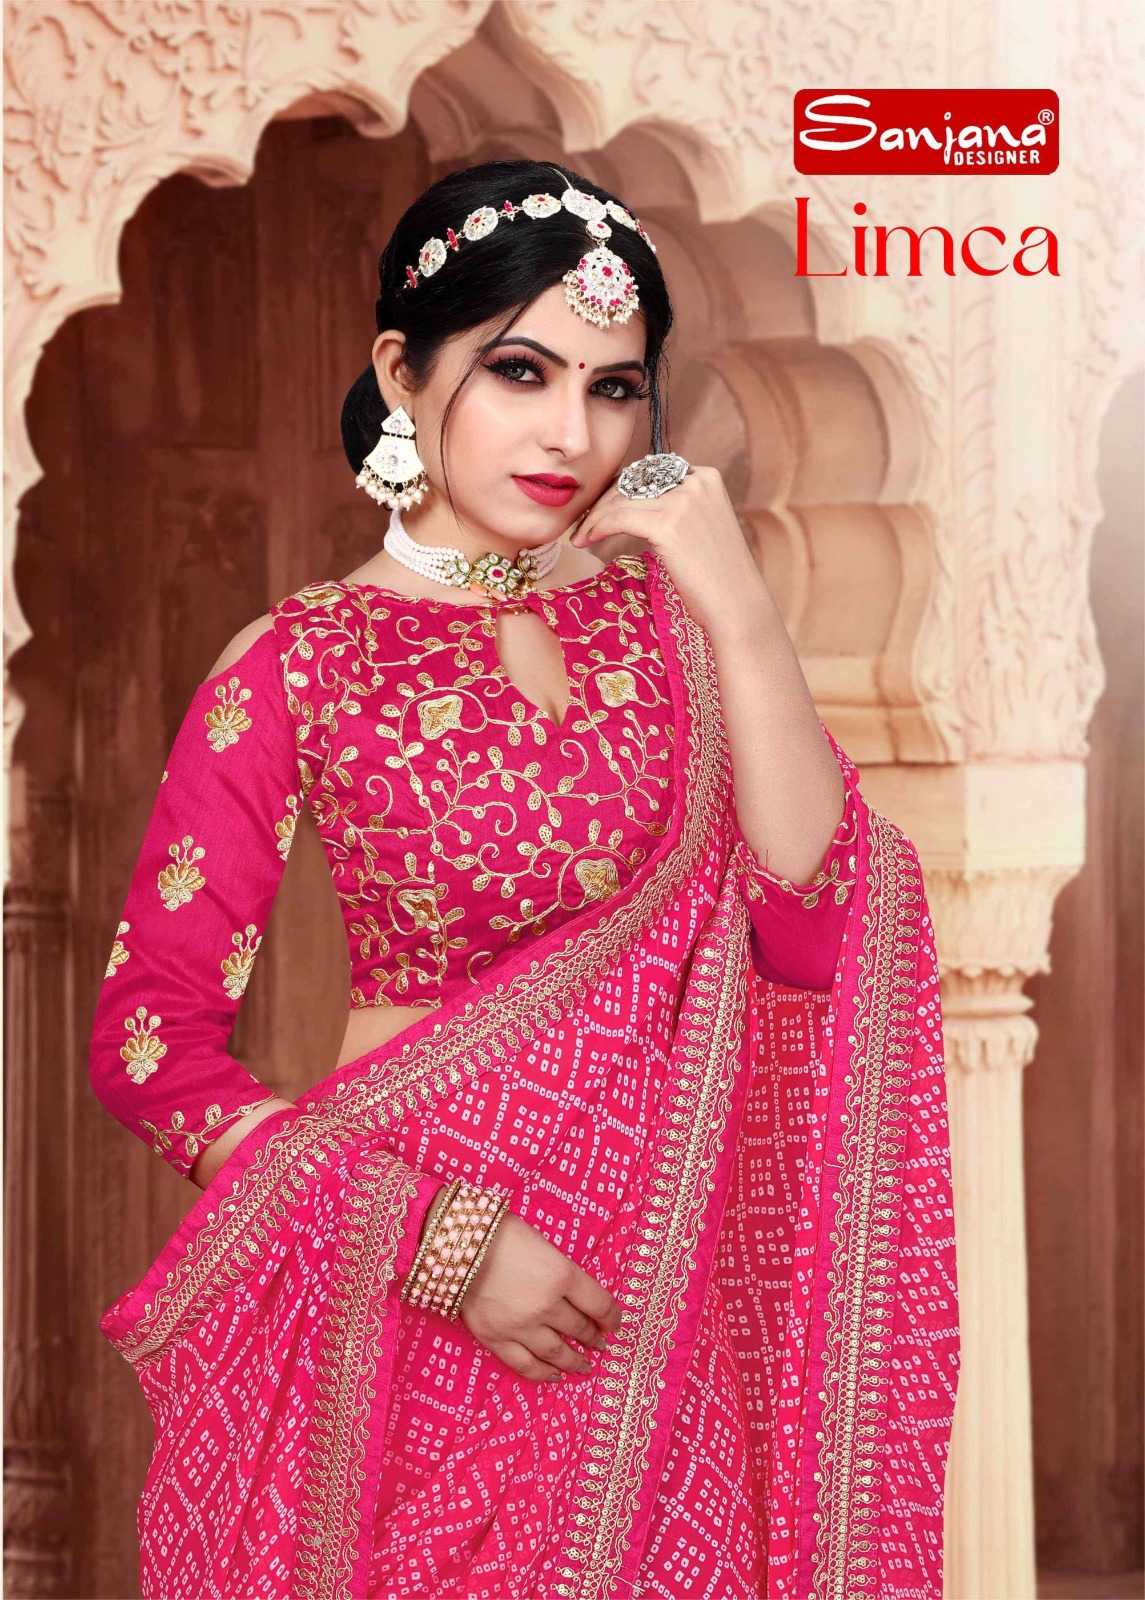 limca vol 3 by sanjana designer weightless saree with border work and blouse collection